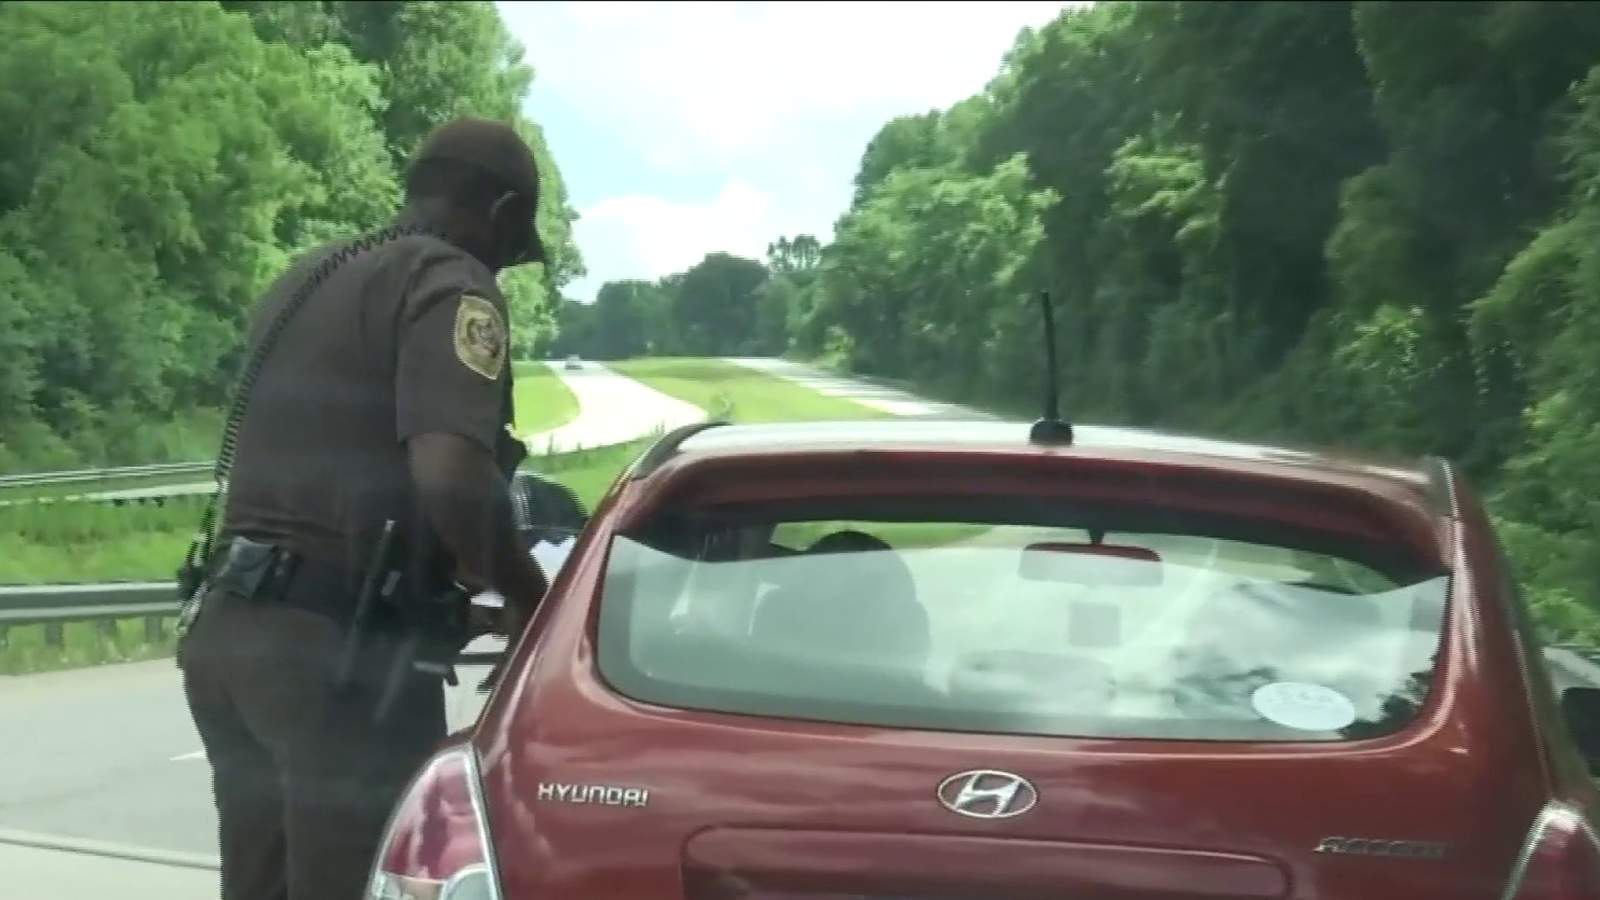 New Virginia law requires officers to record persons race during traffic stop